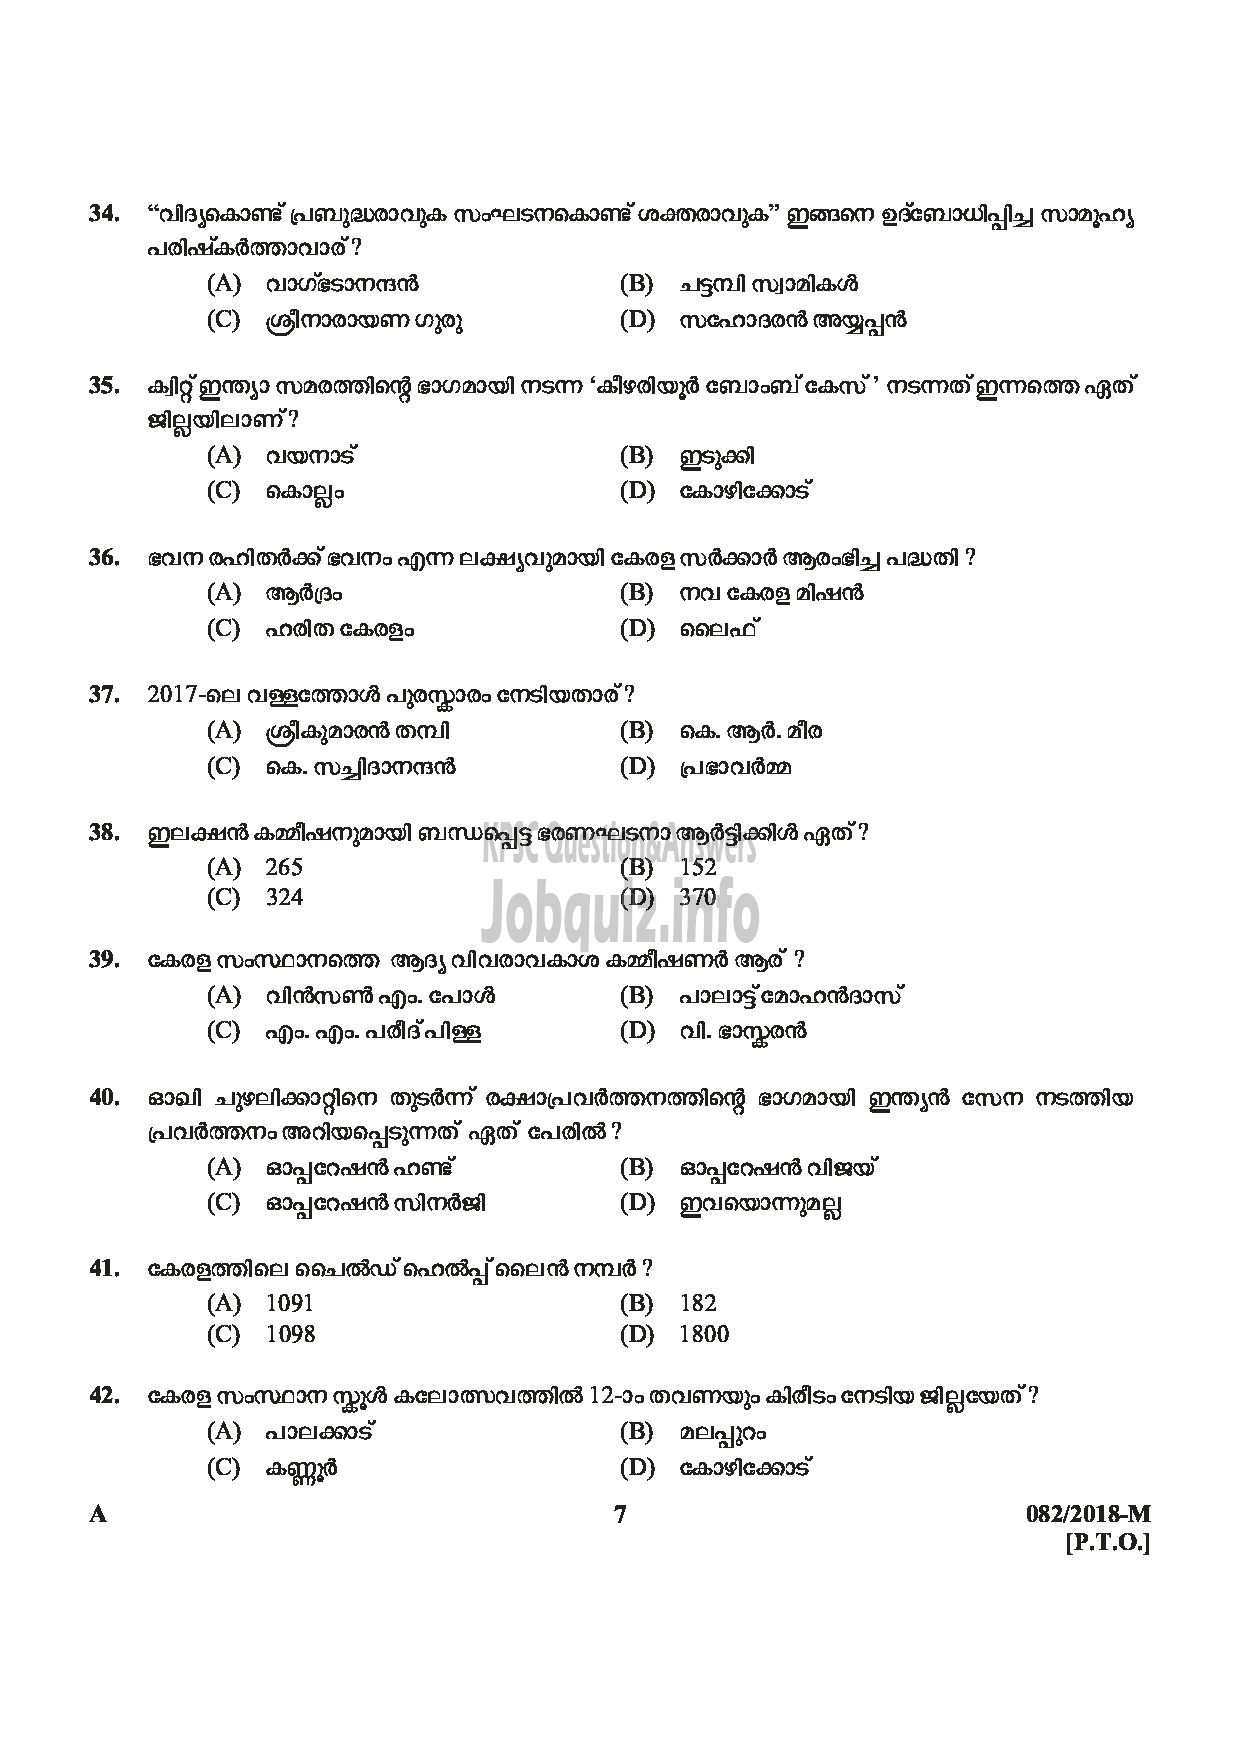 Kerala PSC Question Paper - LAB ASSISTANT HIGHER SECONDARY EDUCATION-7